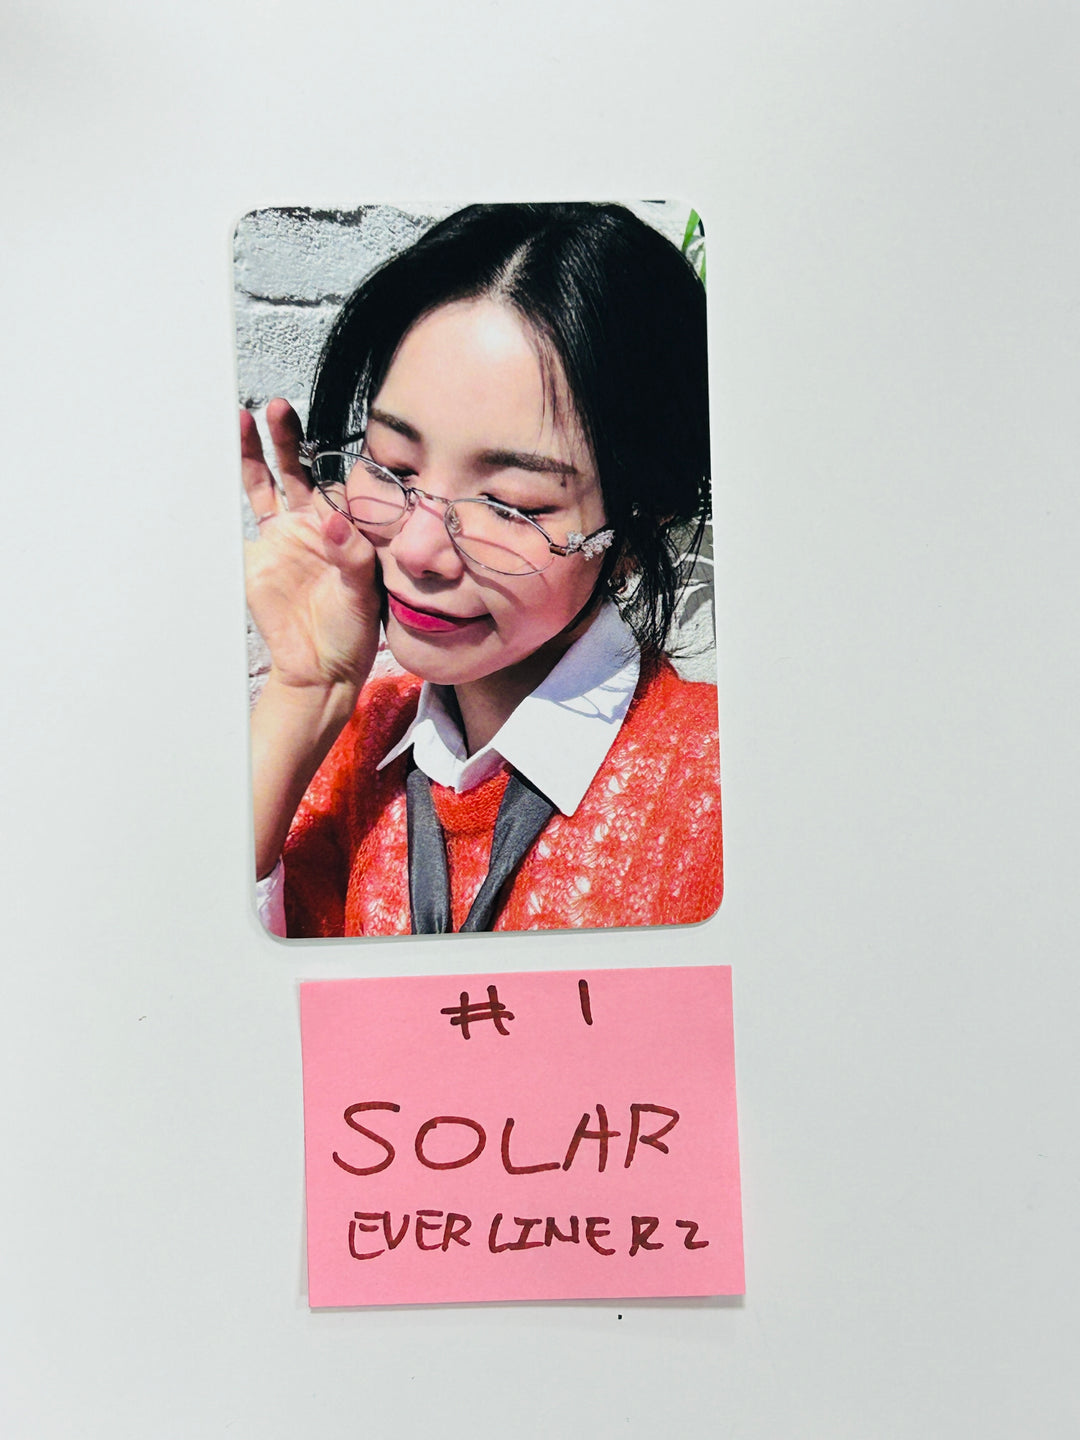 SOLAR "COLOURS" - Everline Fansign Event Photocard Round 2 [24.5.10]